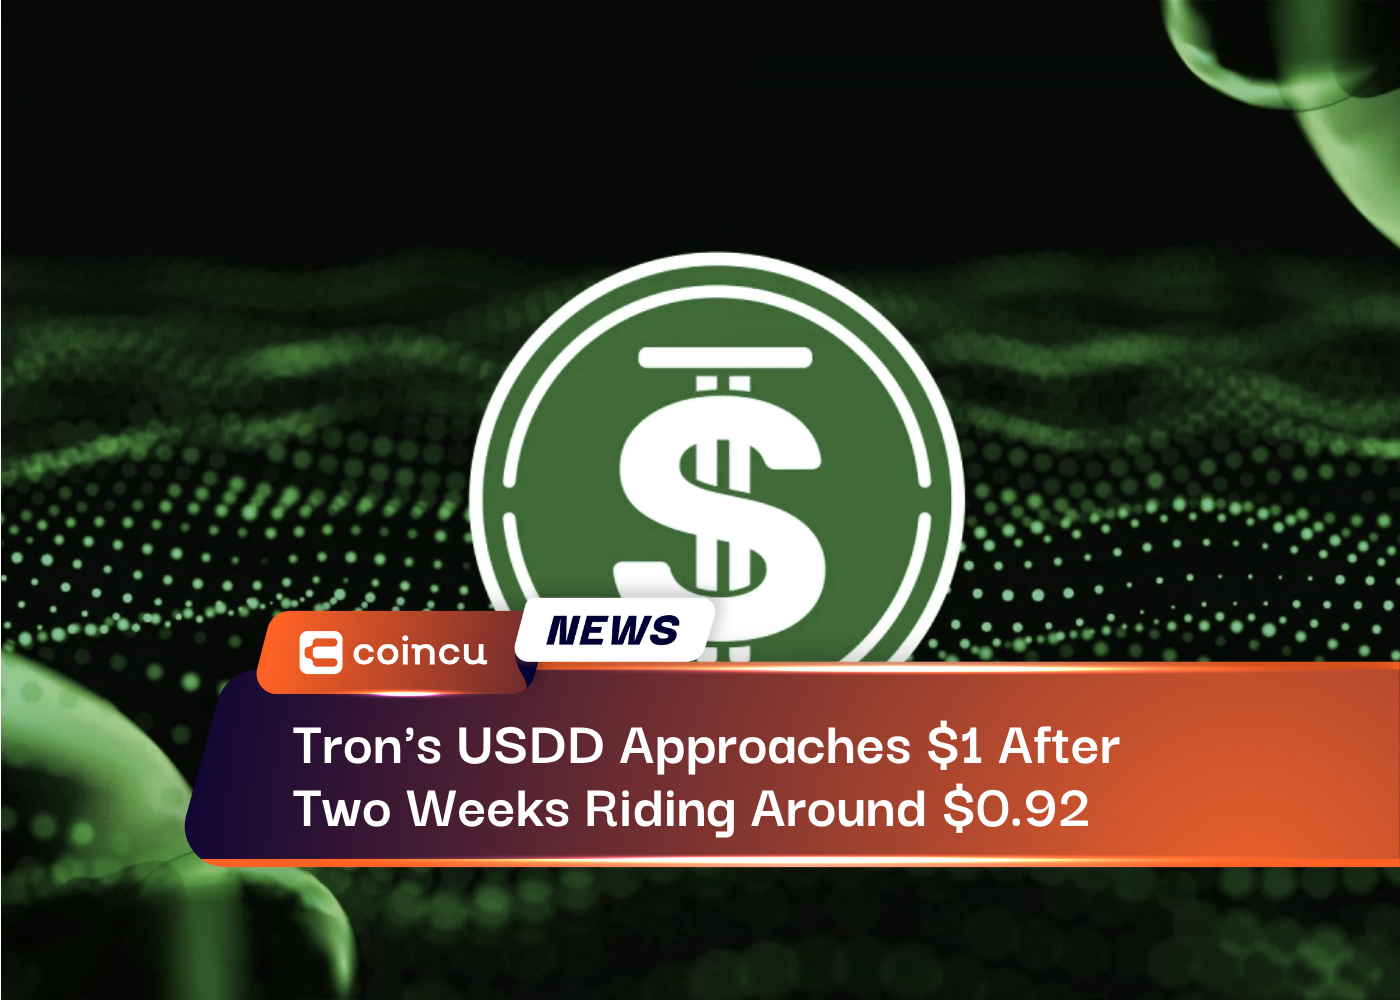 Tron's USDD Approaches $1 After Two Weeks Riding Around $0.92